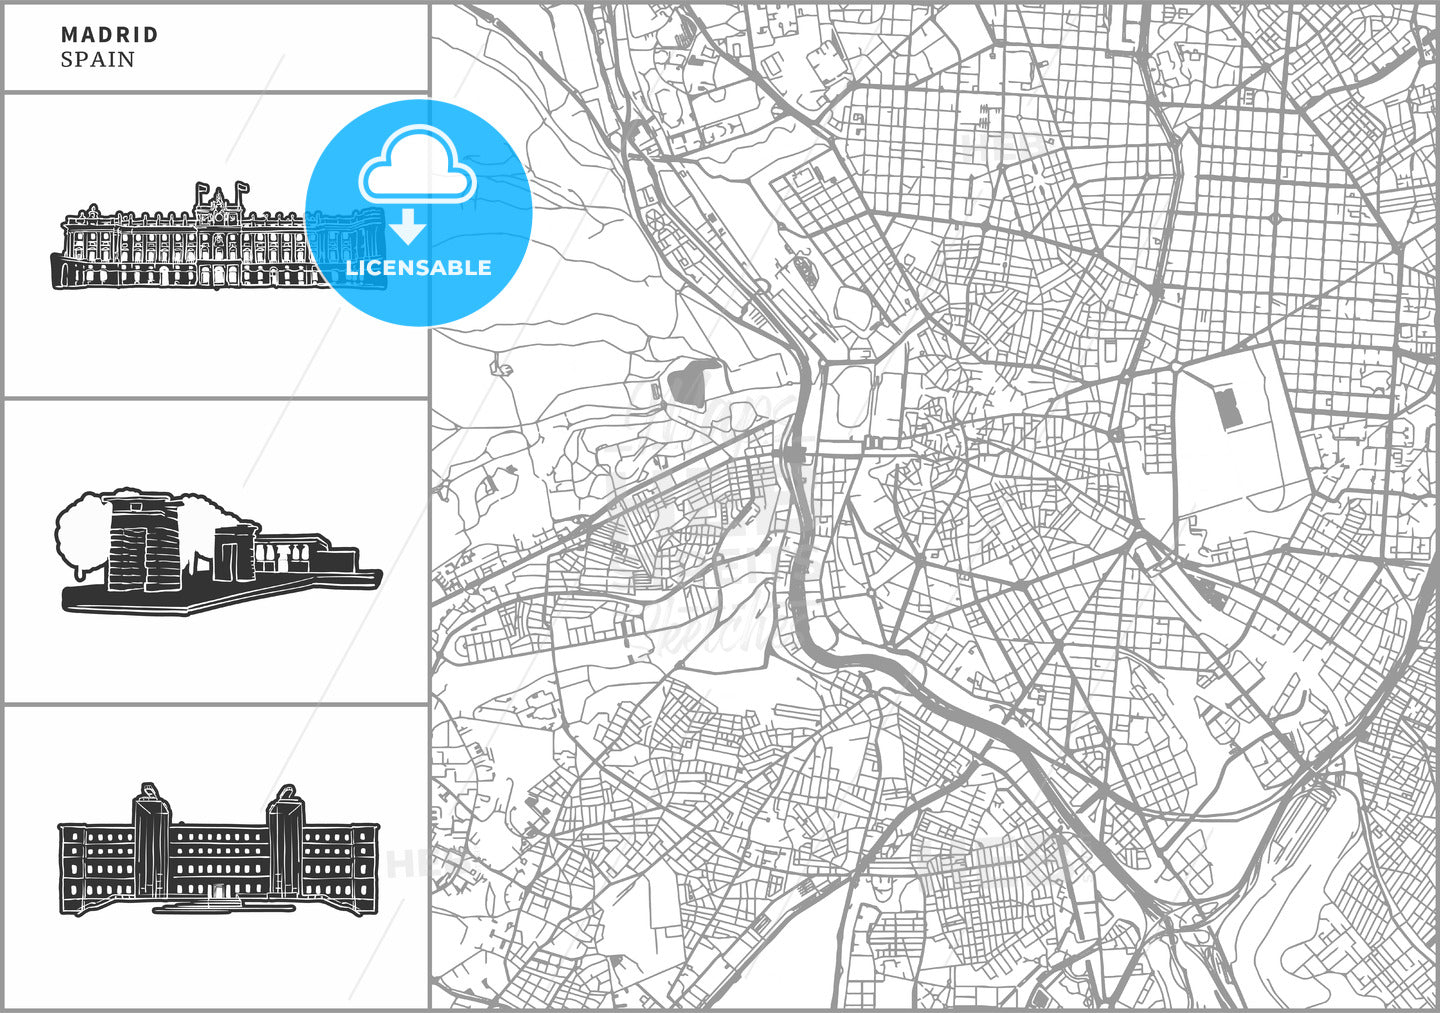 Madrid city map with hand-drawn architecture icons